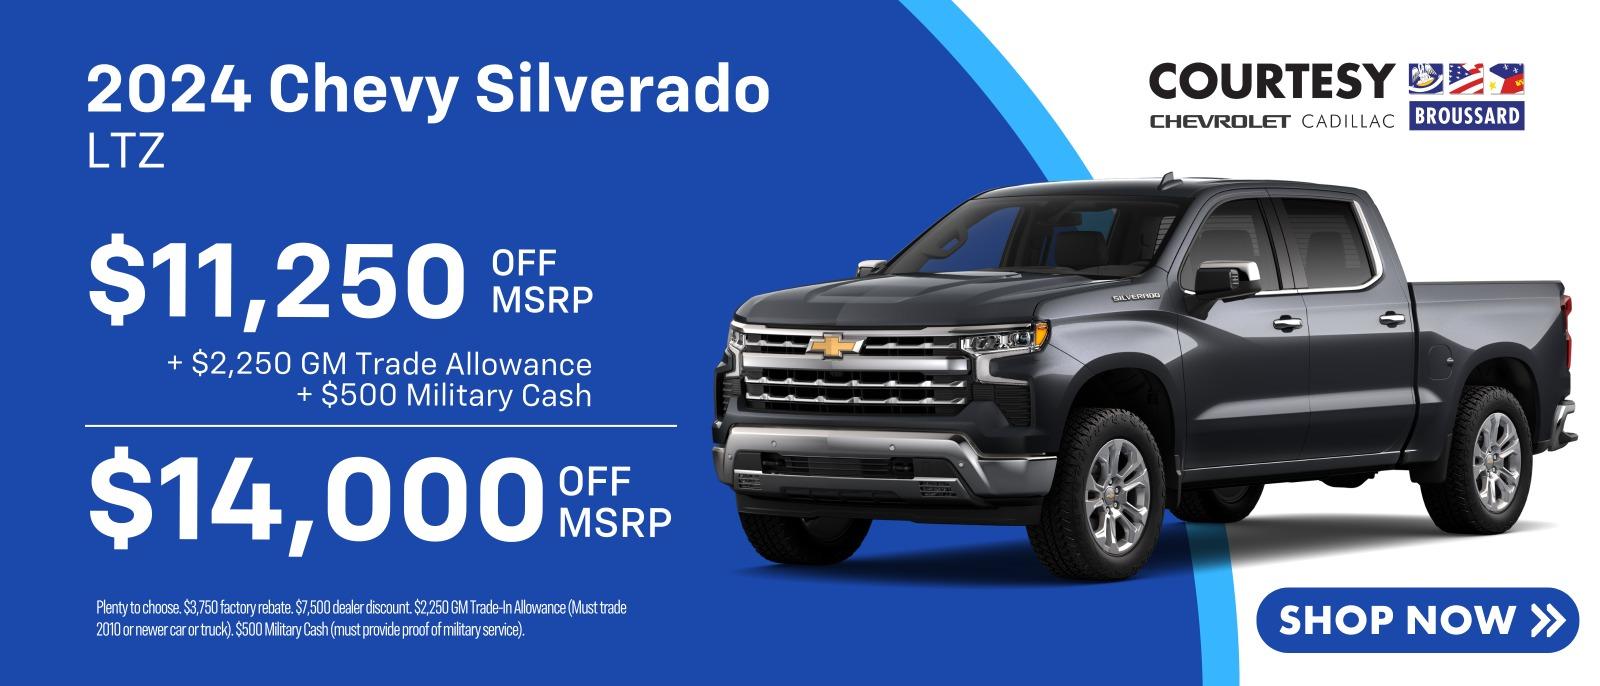 2024 Chevy Silverado OFF $11,250 MSRP + $2,250 GM Trade Allowance + $500 Military Cash $14,000 OFF MSRP